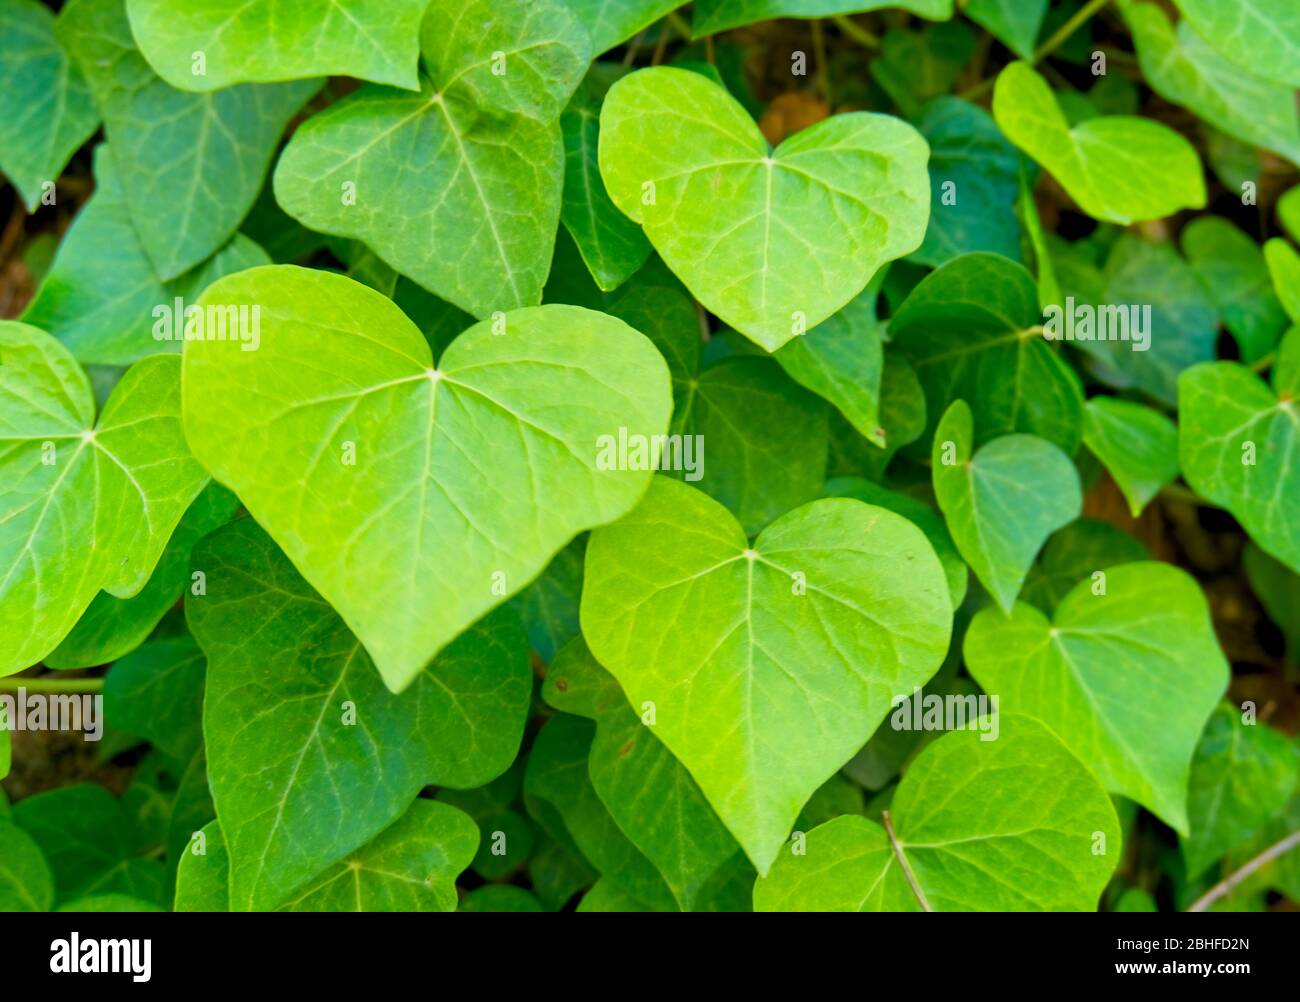 background with heart-shaped leaves. Heart-shaped green leaves climbing vines Cow-wine ivy the most sifted forest plant growing in the wild Stock Photo